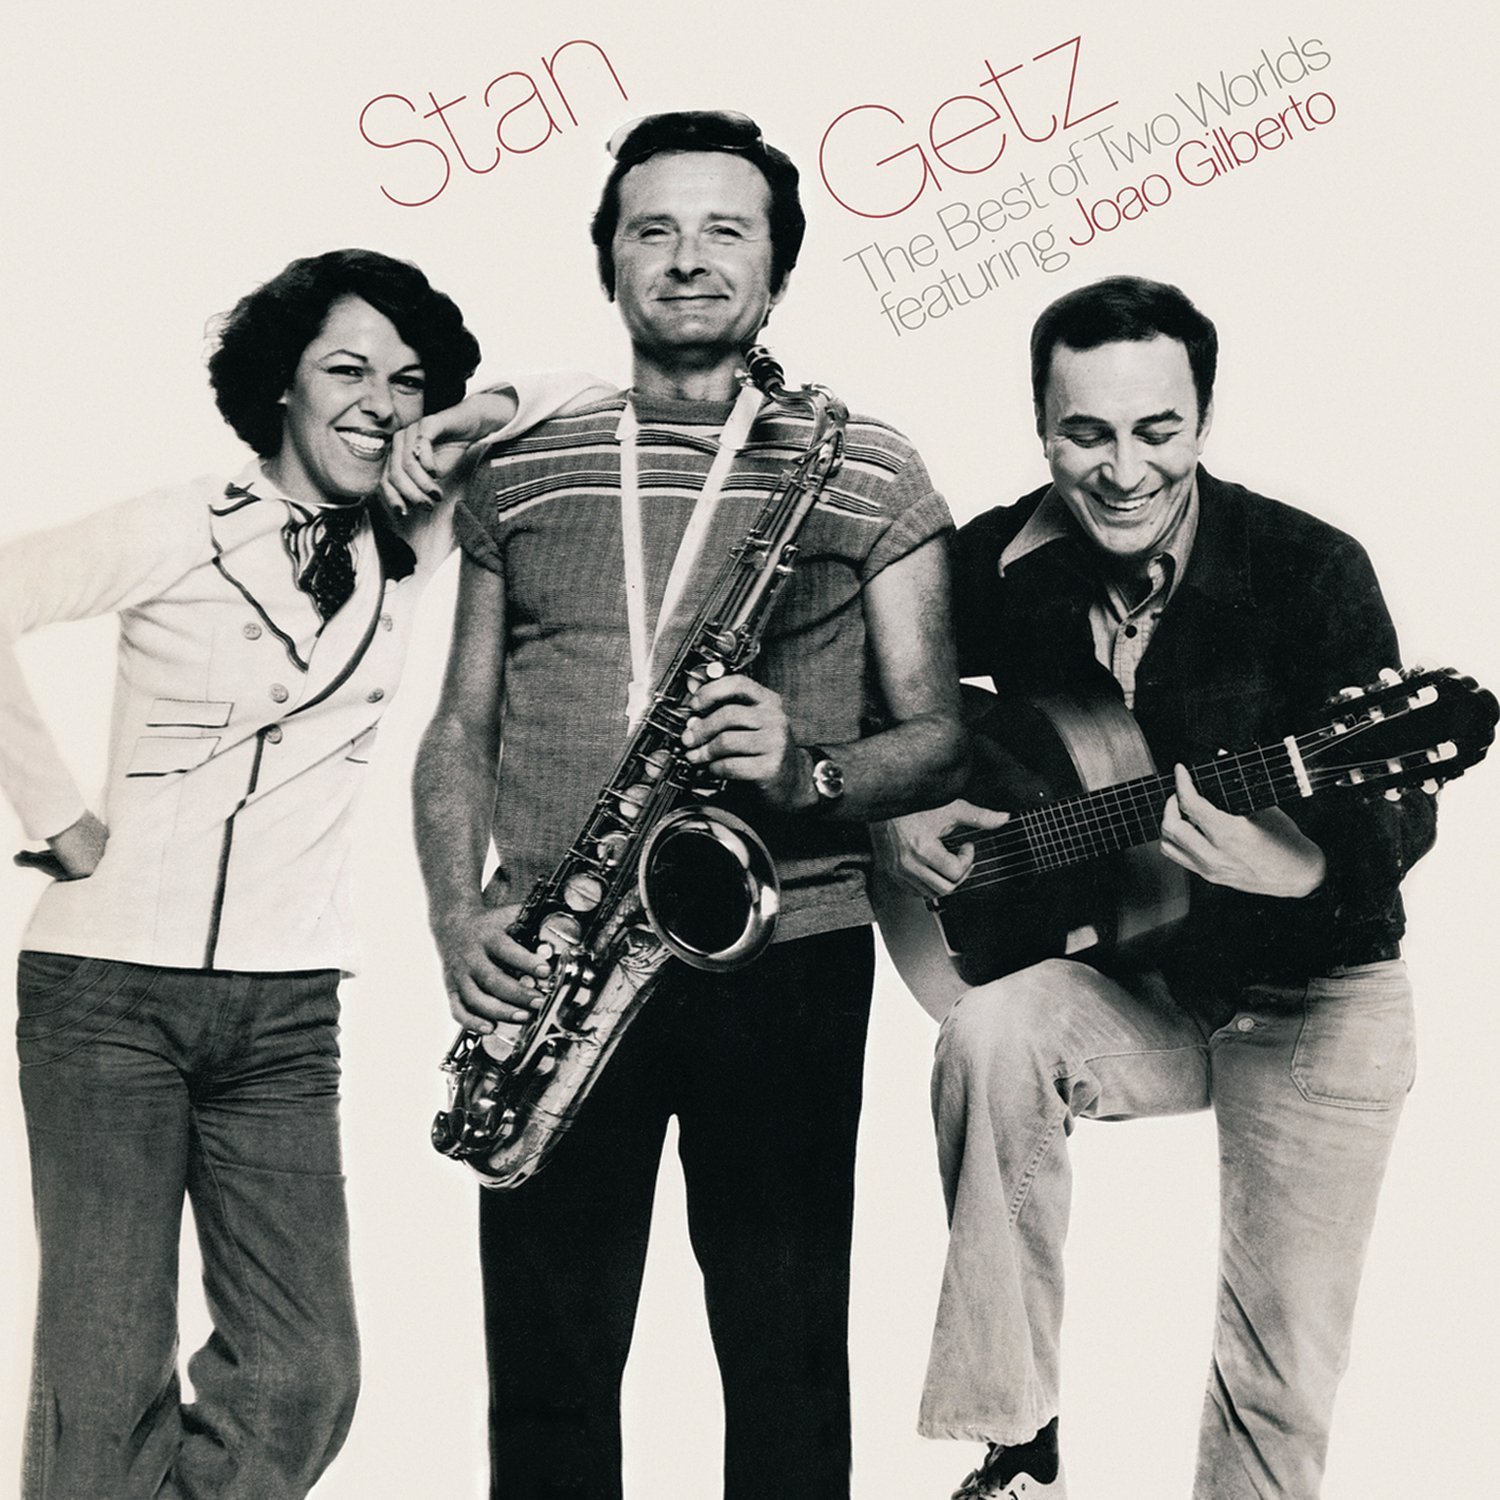 The Best Of Two Worlds | Stan Getz, Joao Gilberto